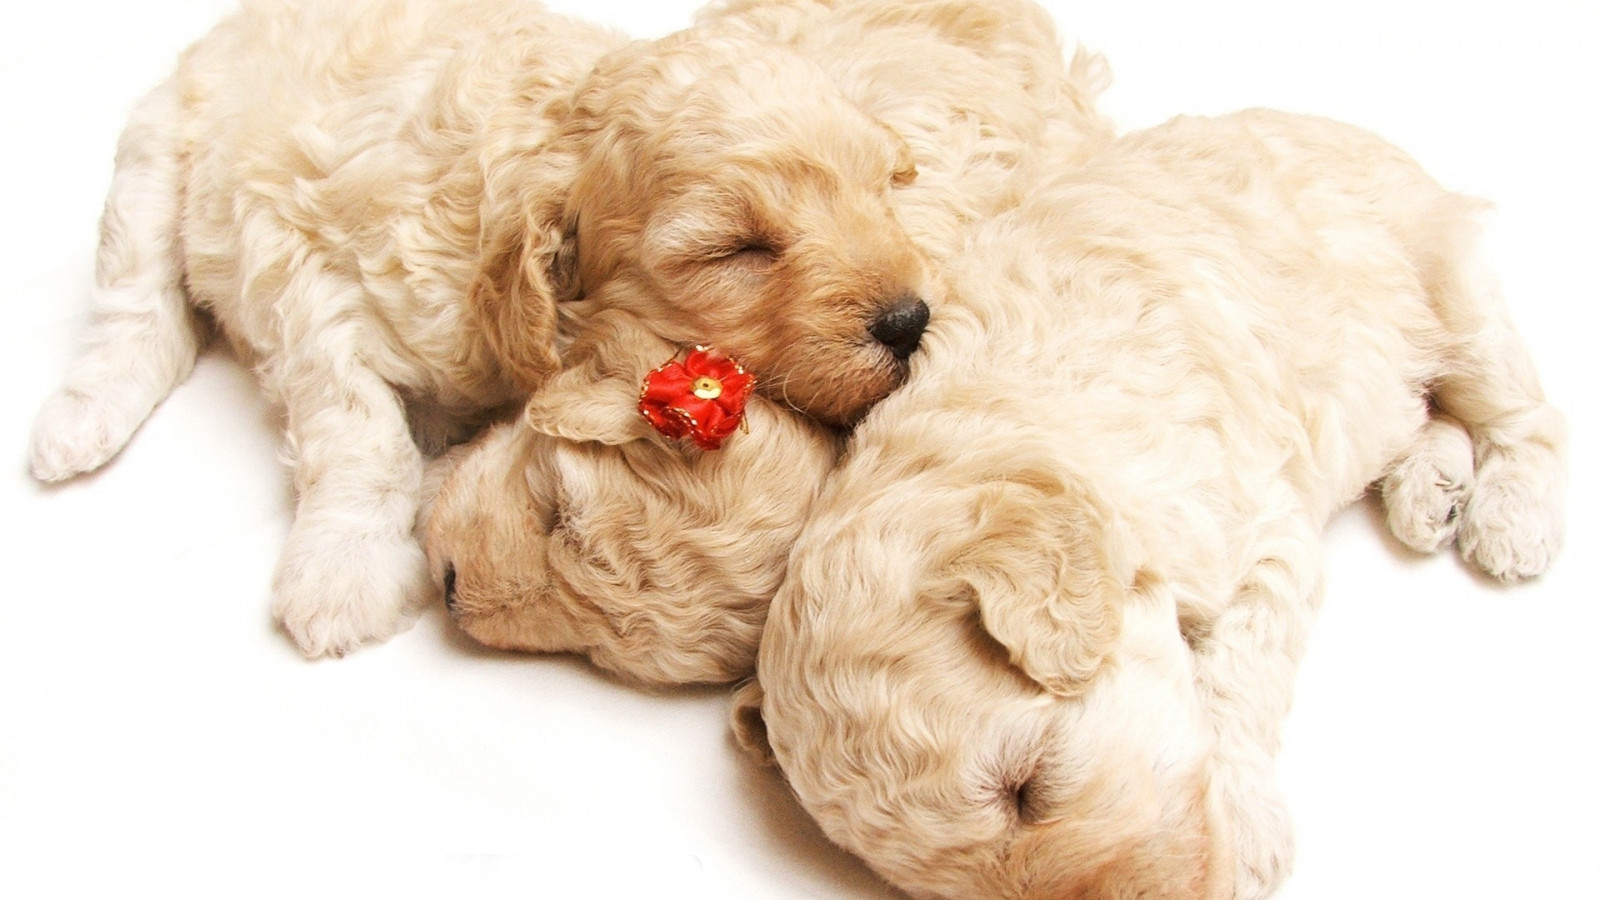 Wallpaper, sleeping, holiday, puppies, curly, dog like mammal, dog crossbreeds, dog breed, cavachon, goldendoodle, cavapoo, puppy love, schnoodle, miniature poodle, cockapoo, dandie dinmont terrier, poodle crossbreed, toy poodle 1920x1080